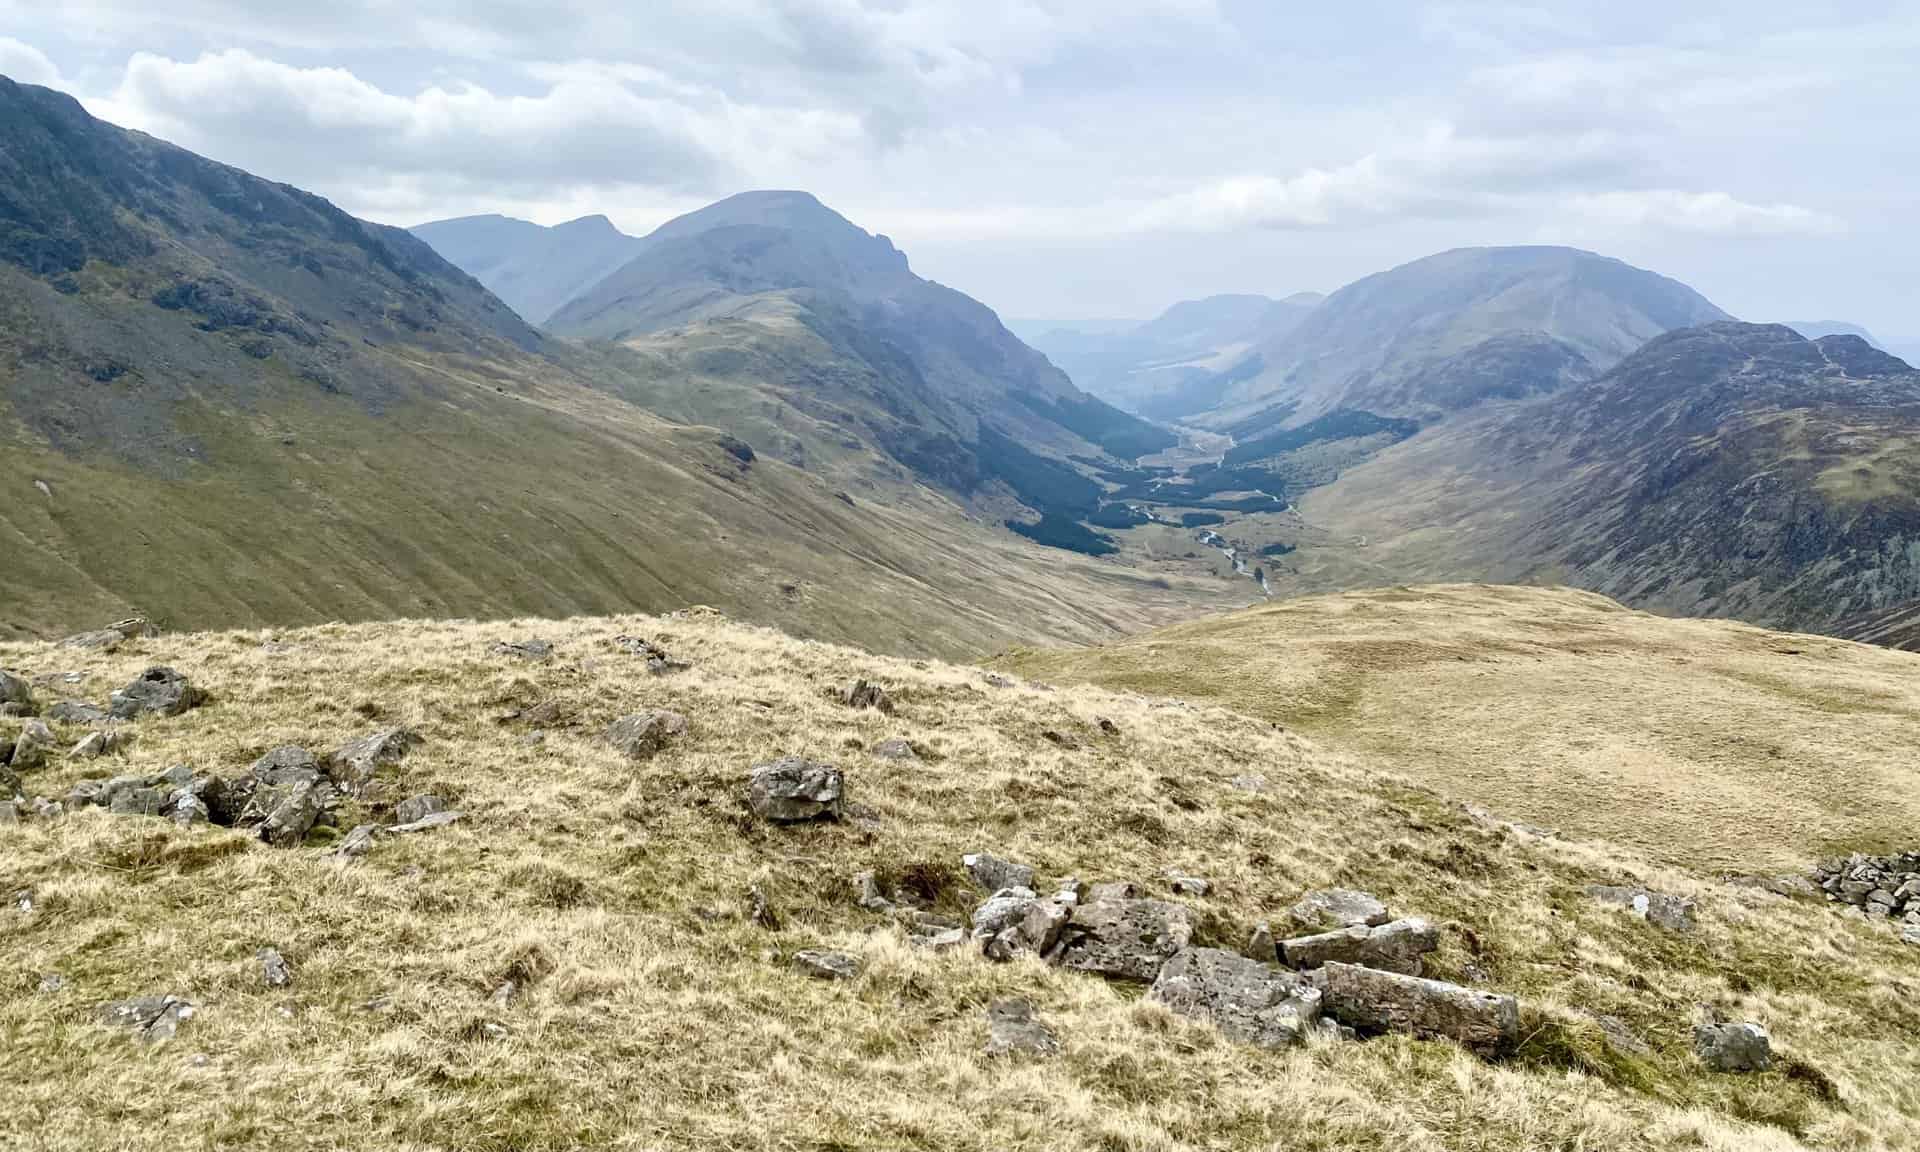 The mountain range on the southern (left) side of the Ennerdale valley includes, from front to back, Pillar, Black Crag and Scoat Fell.